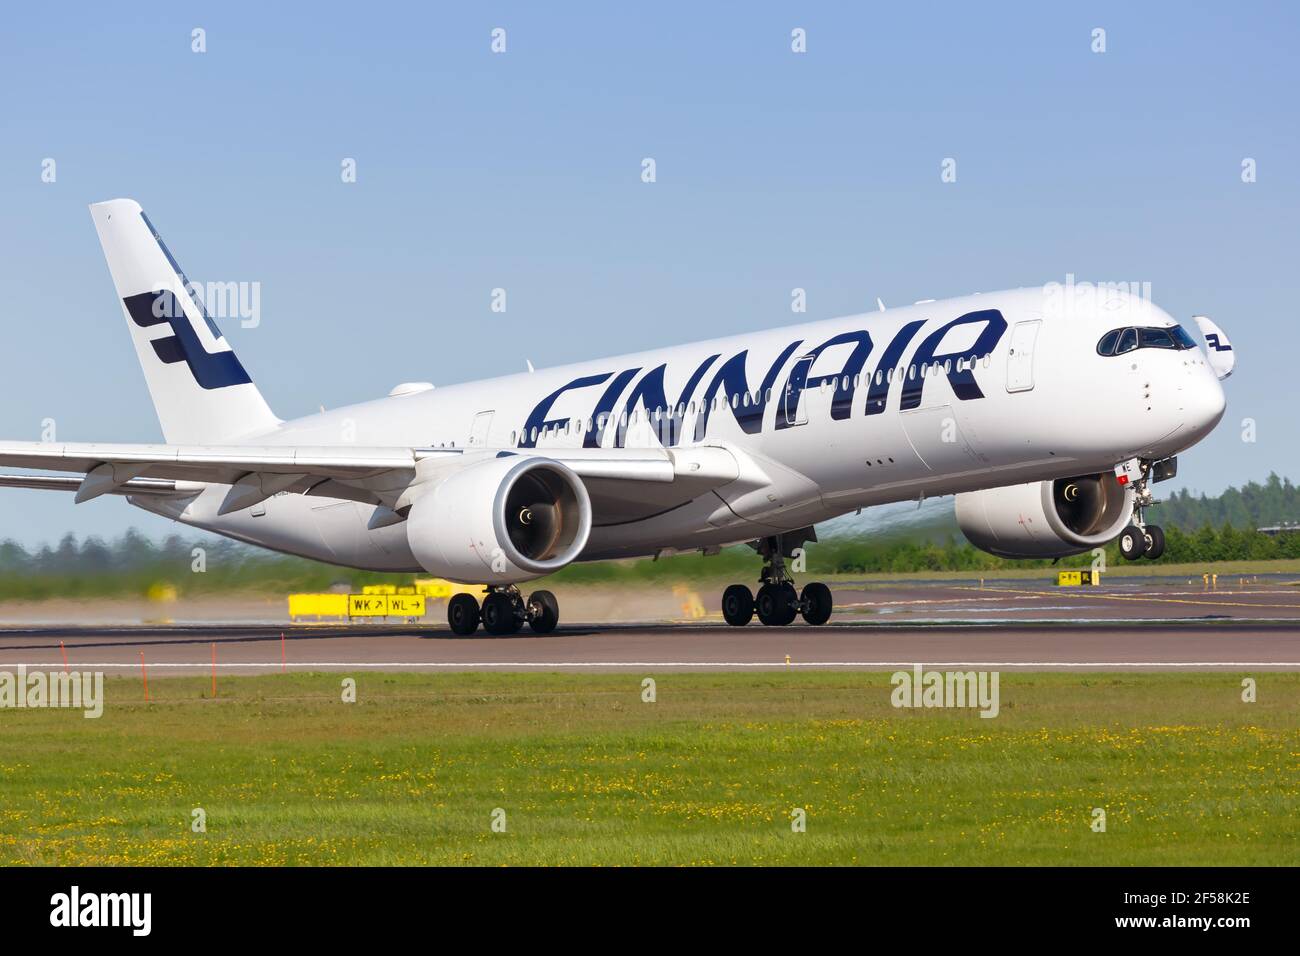 Helsinki, Finland - May 25, 2018: Finnair Airbus A350 airplane taking off at Helsinki airport. Airbus is a European aircraft manufacturer based in Tou Stock Photo